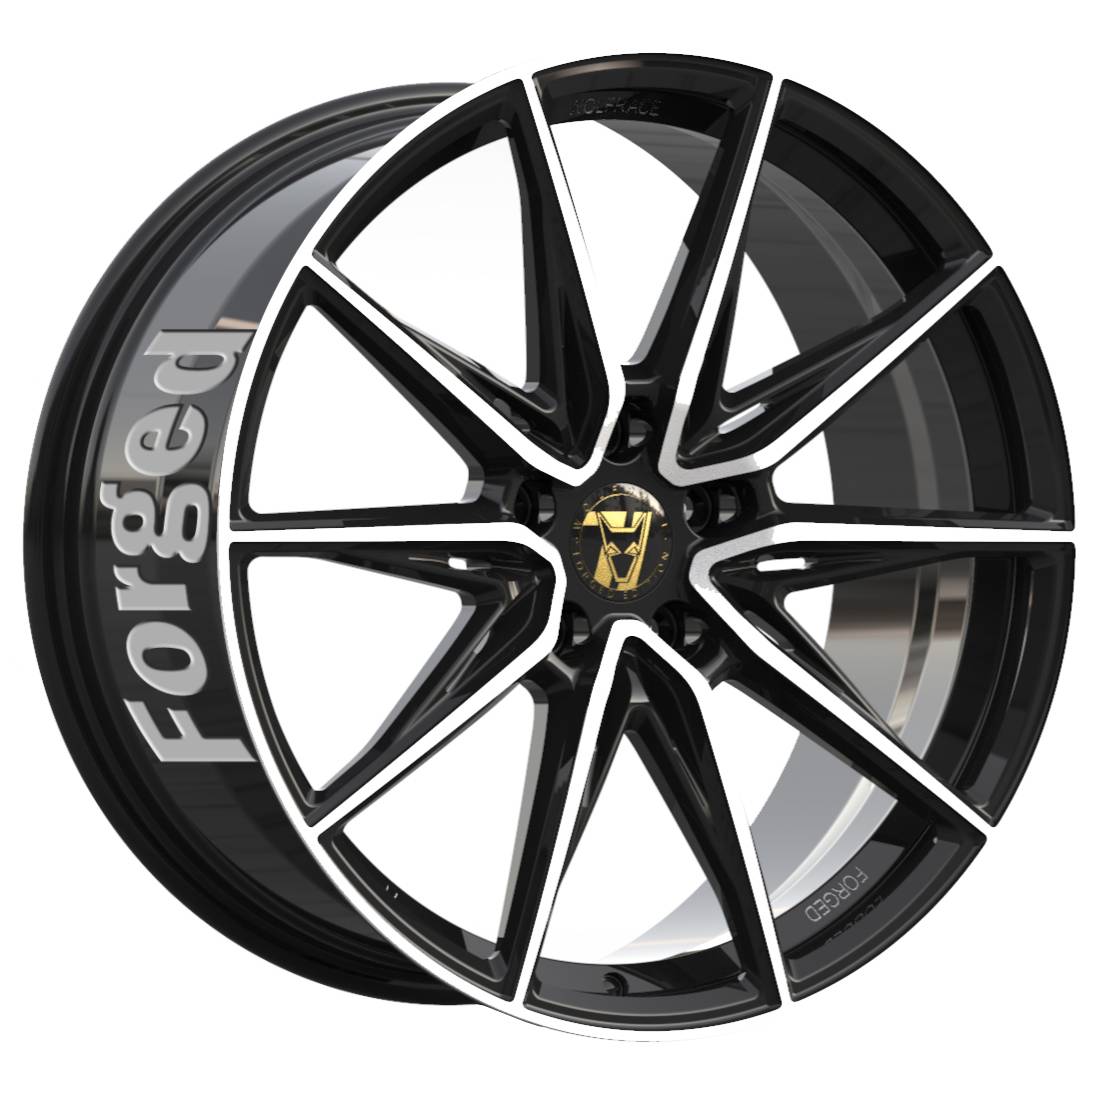 Jantes alu Demon Wheels 71 Forged Edition Urban Racer Forged [10.5x23] -5x108- ET 35